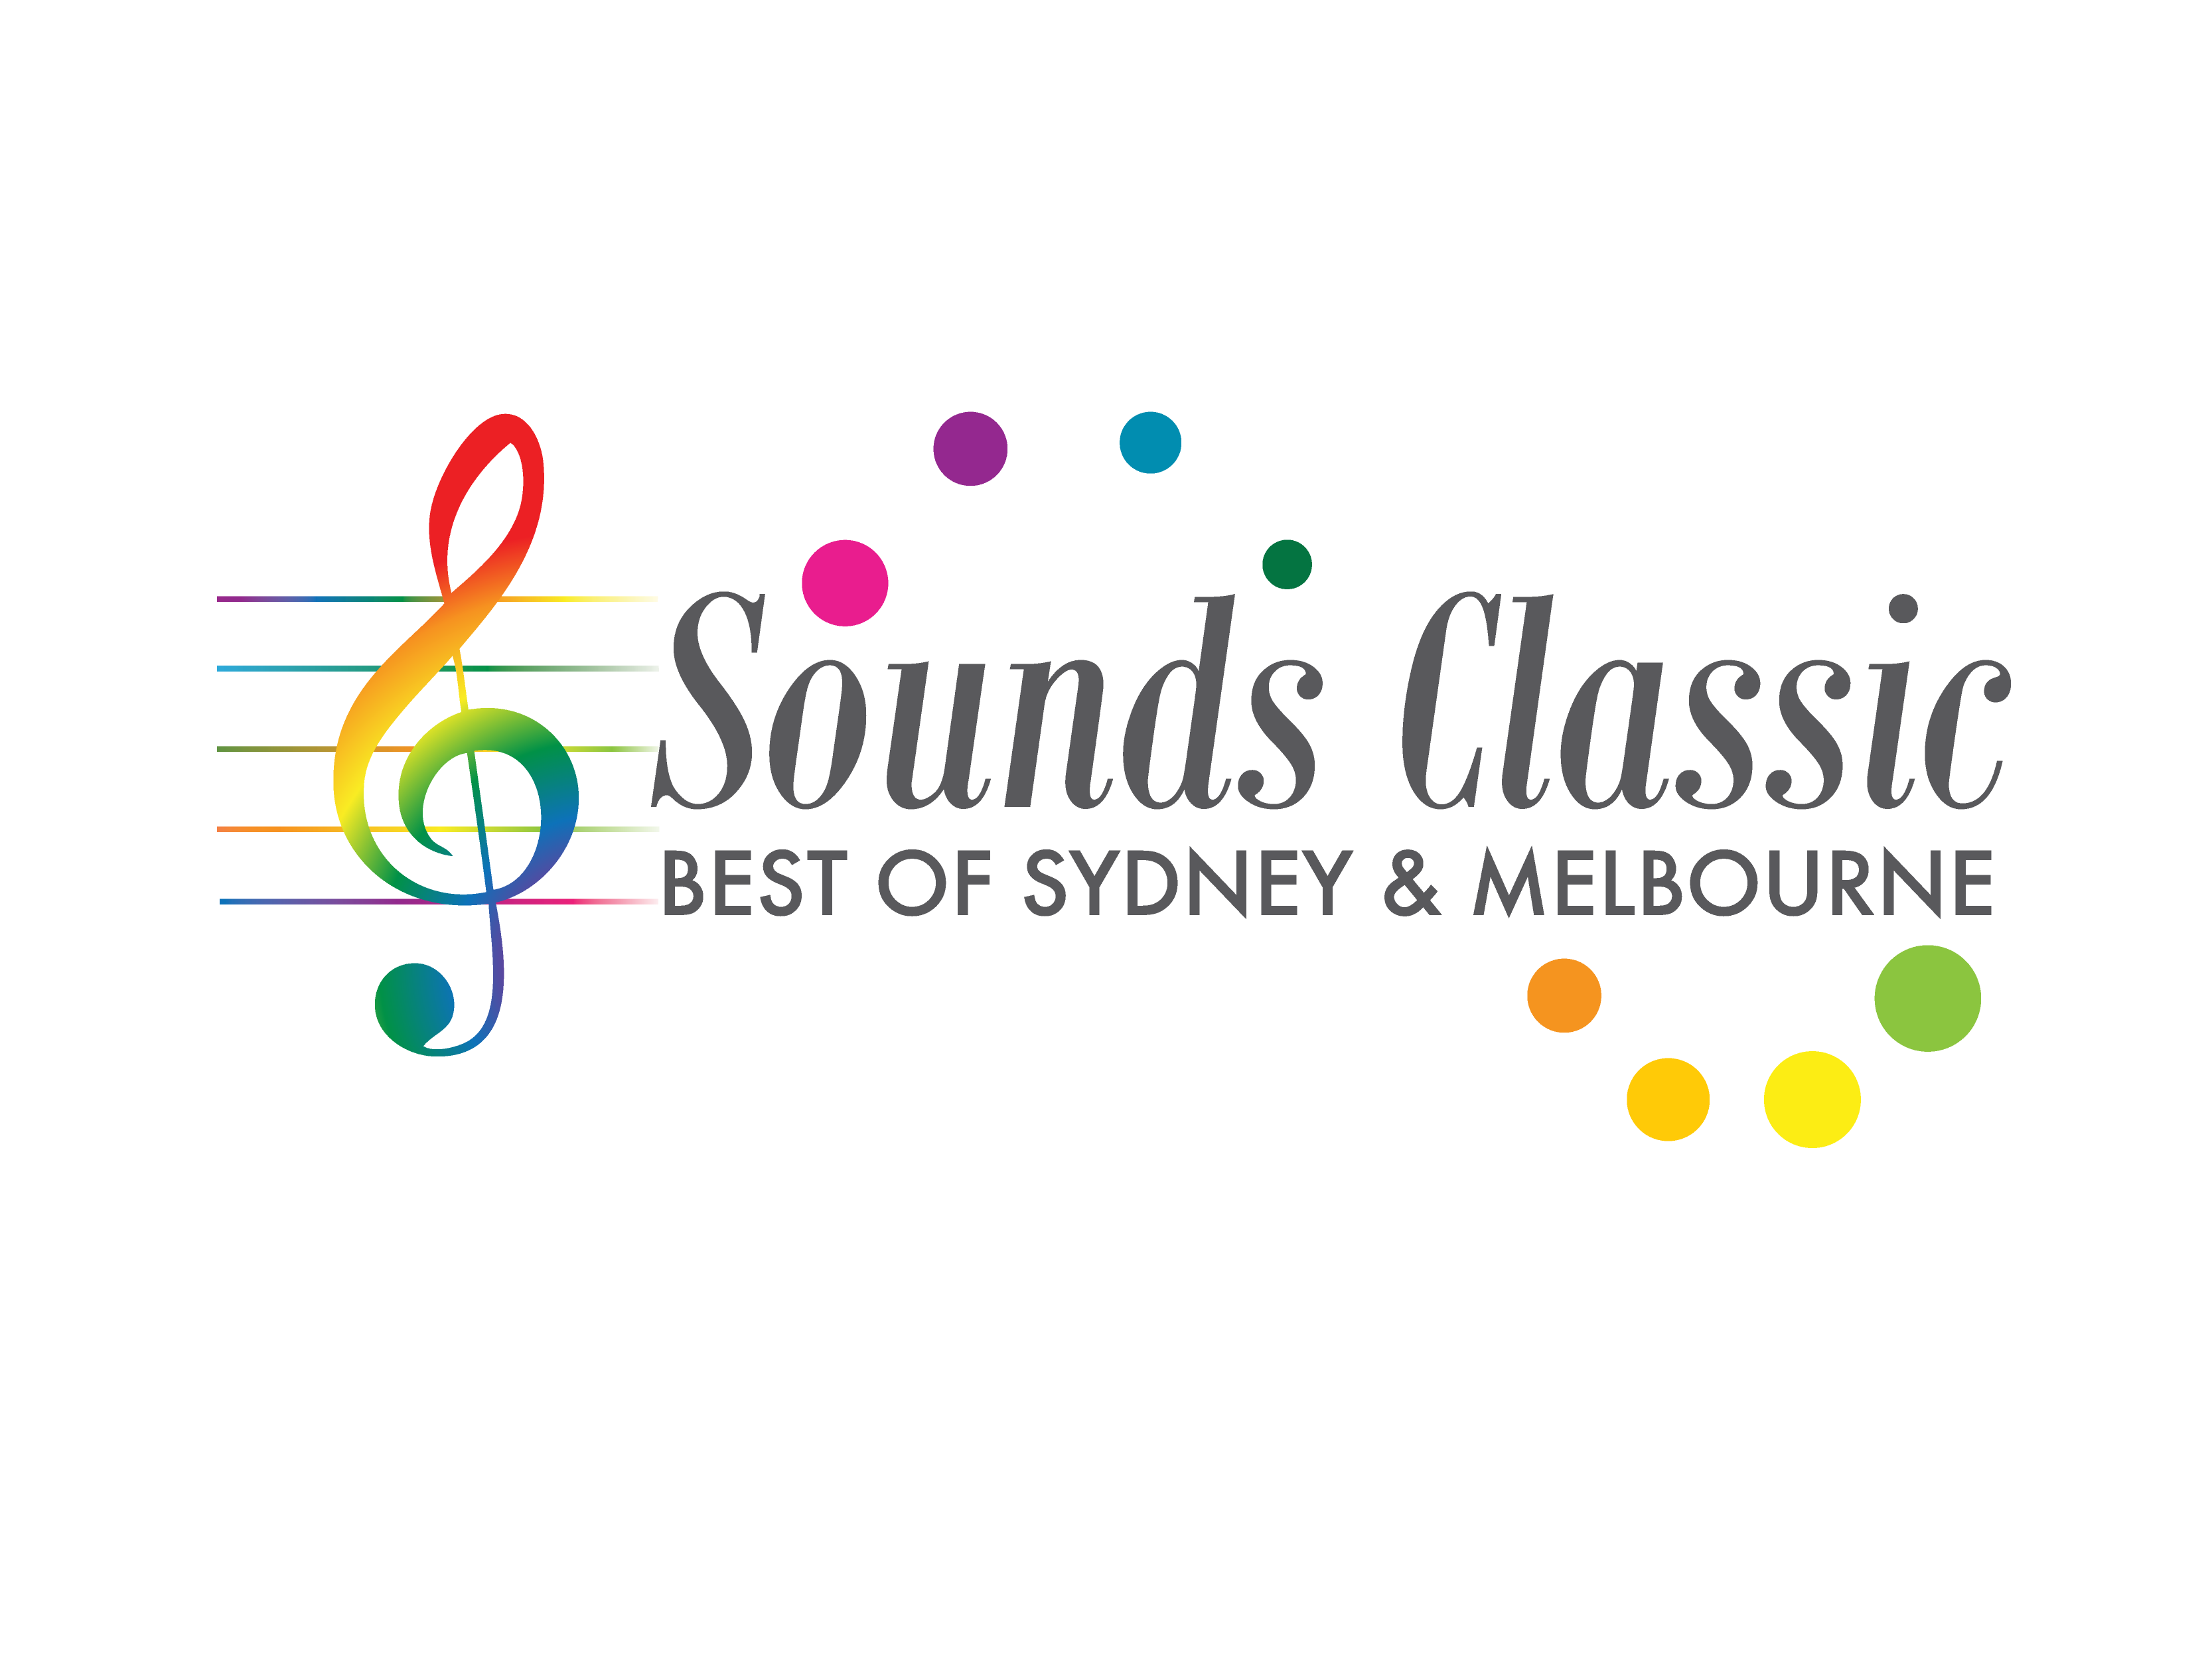 SoundsLikeSydney Launches ‘SoundsClassic’ – A Free Monthly Newsletter collaboration with ClassicMelbourne